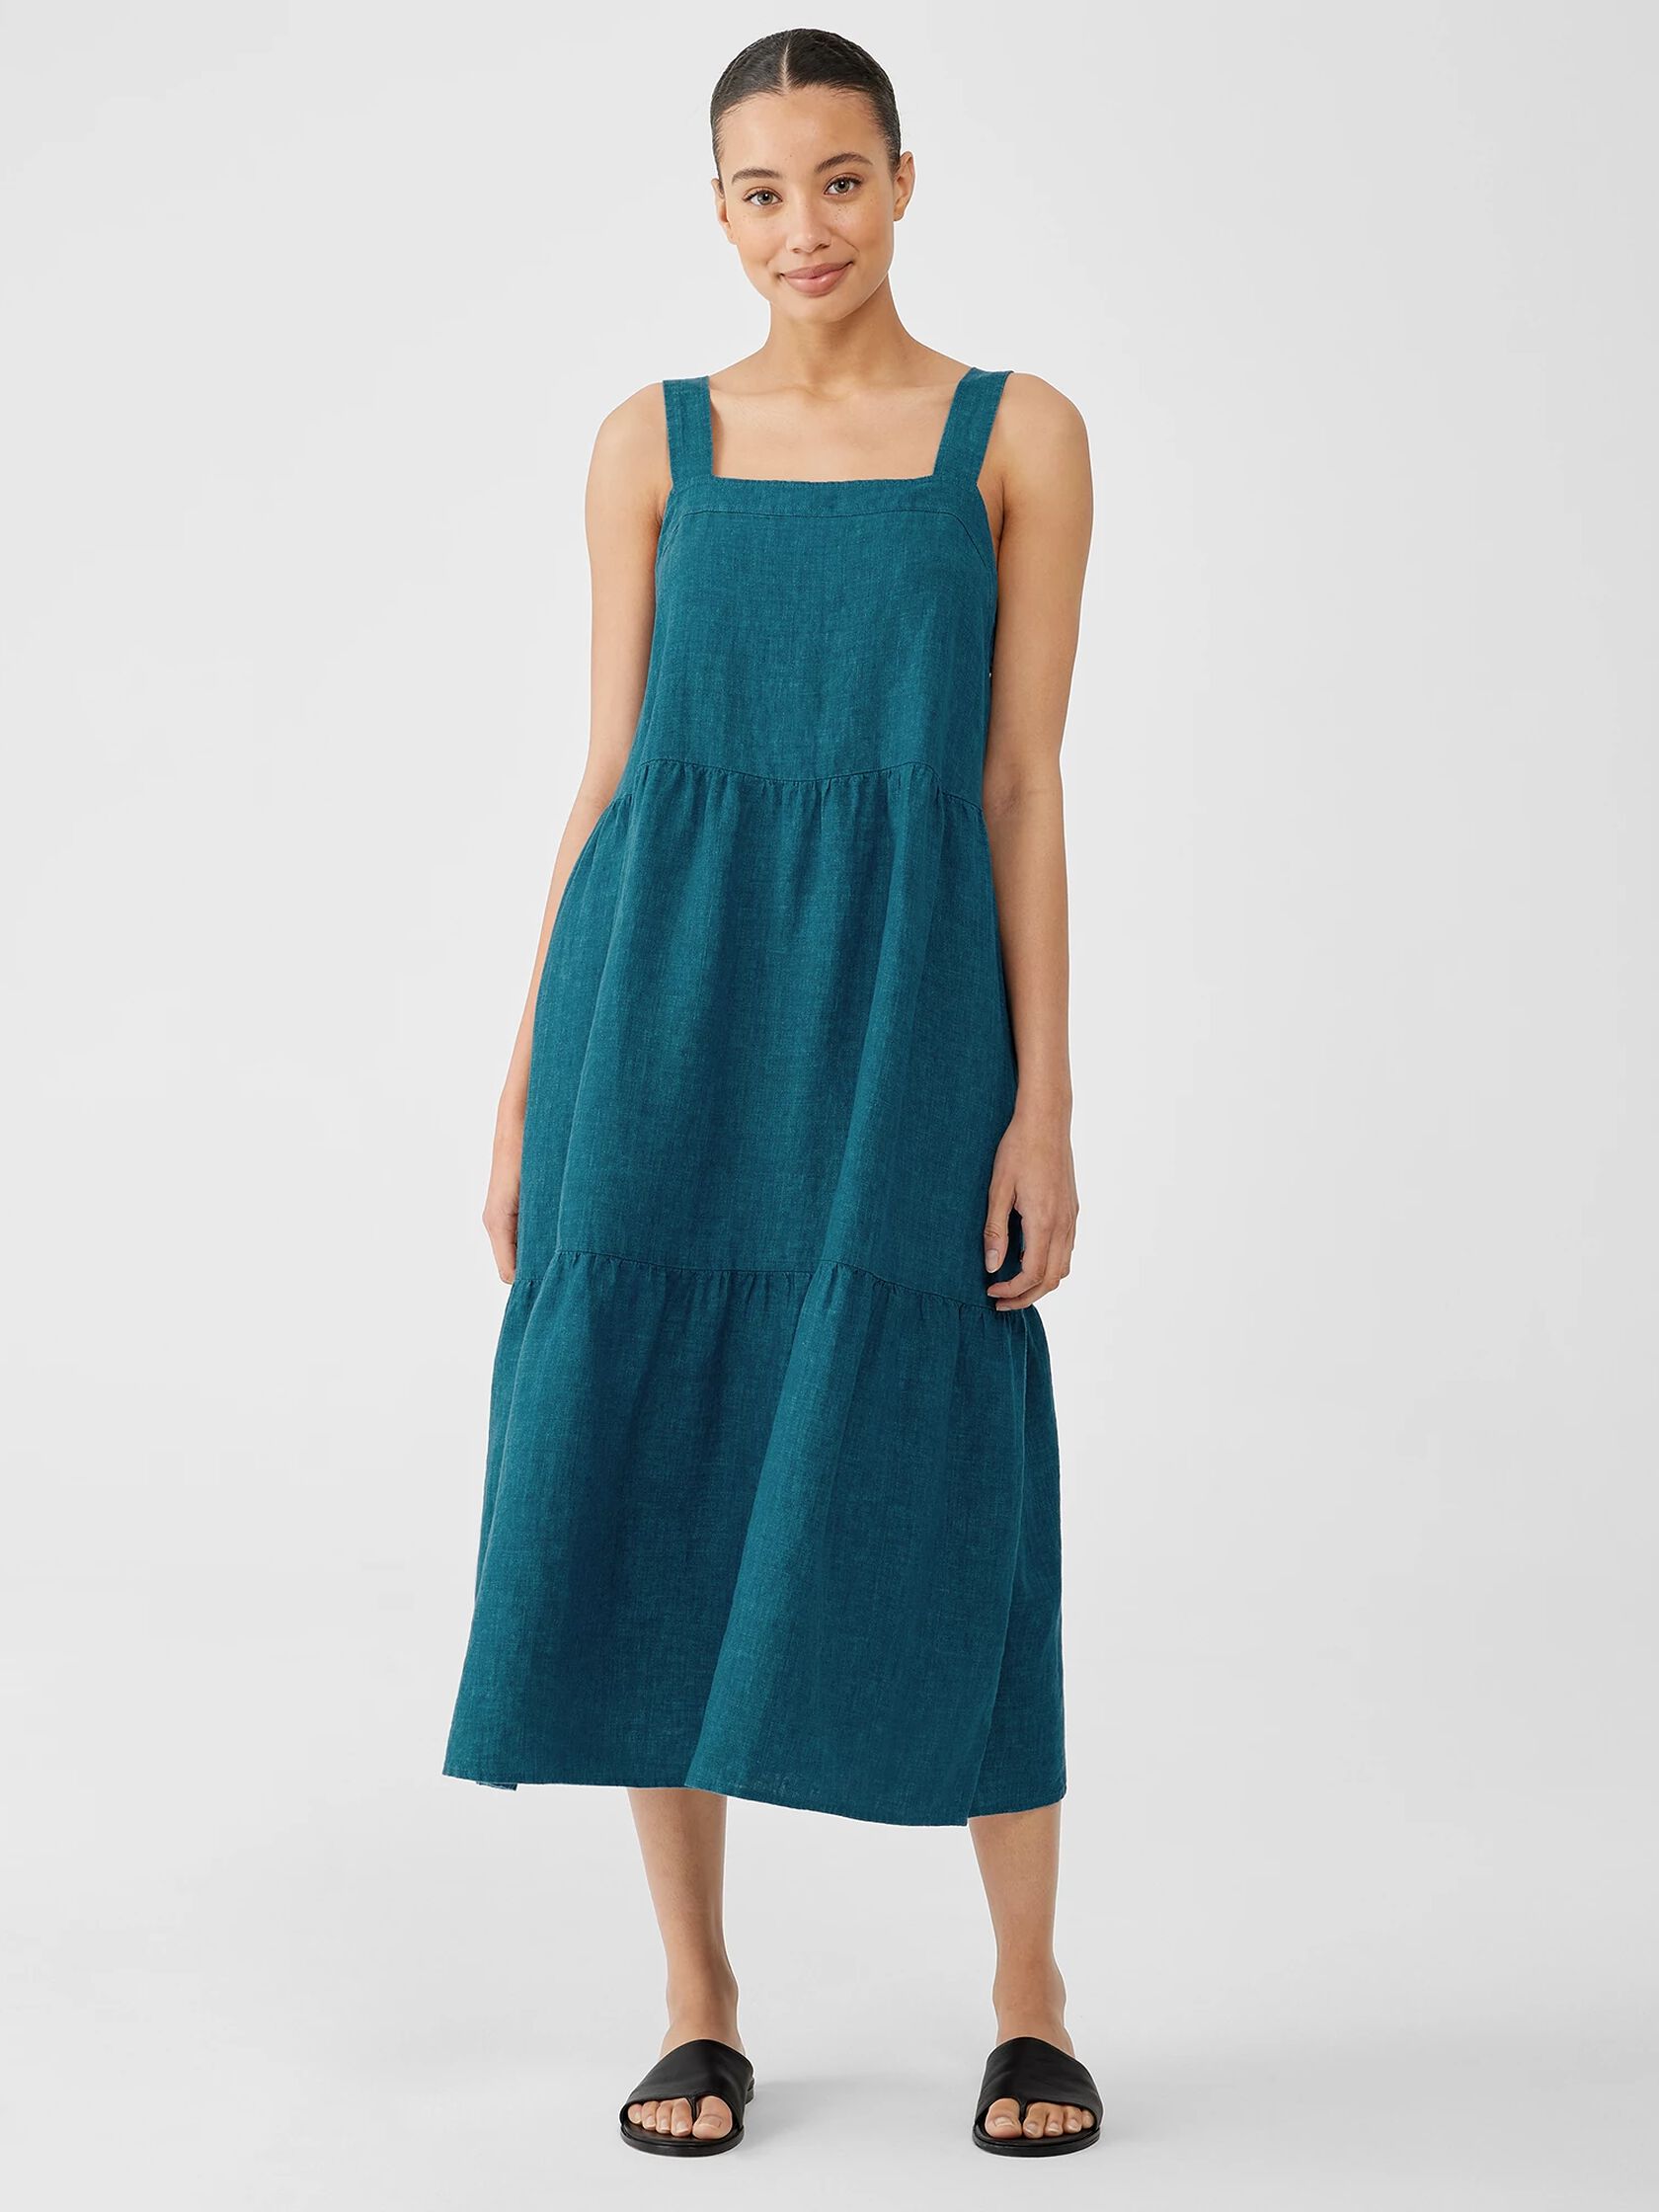 Washed Organic Linen Delave Tiered Dress | EILEEN FISHER